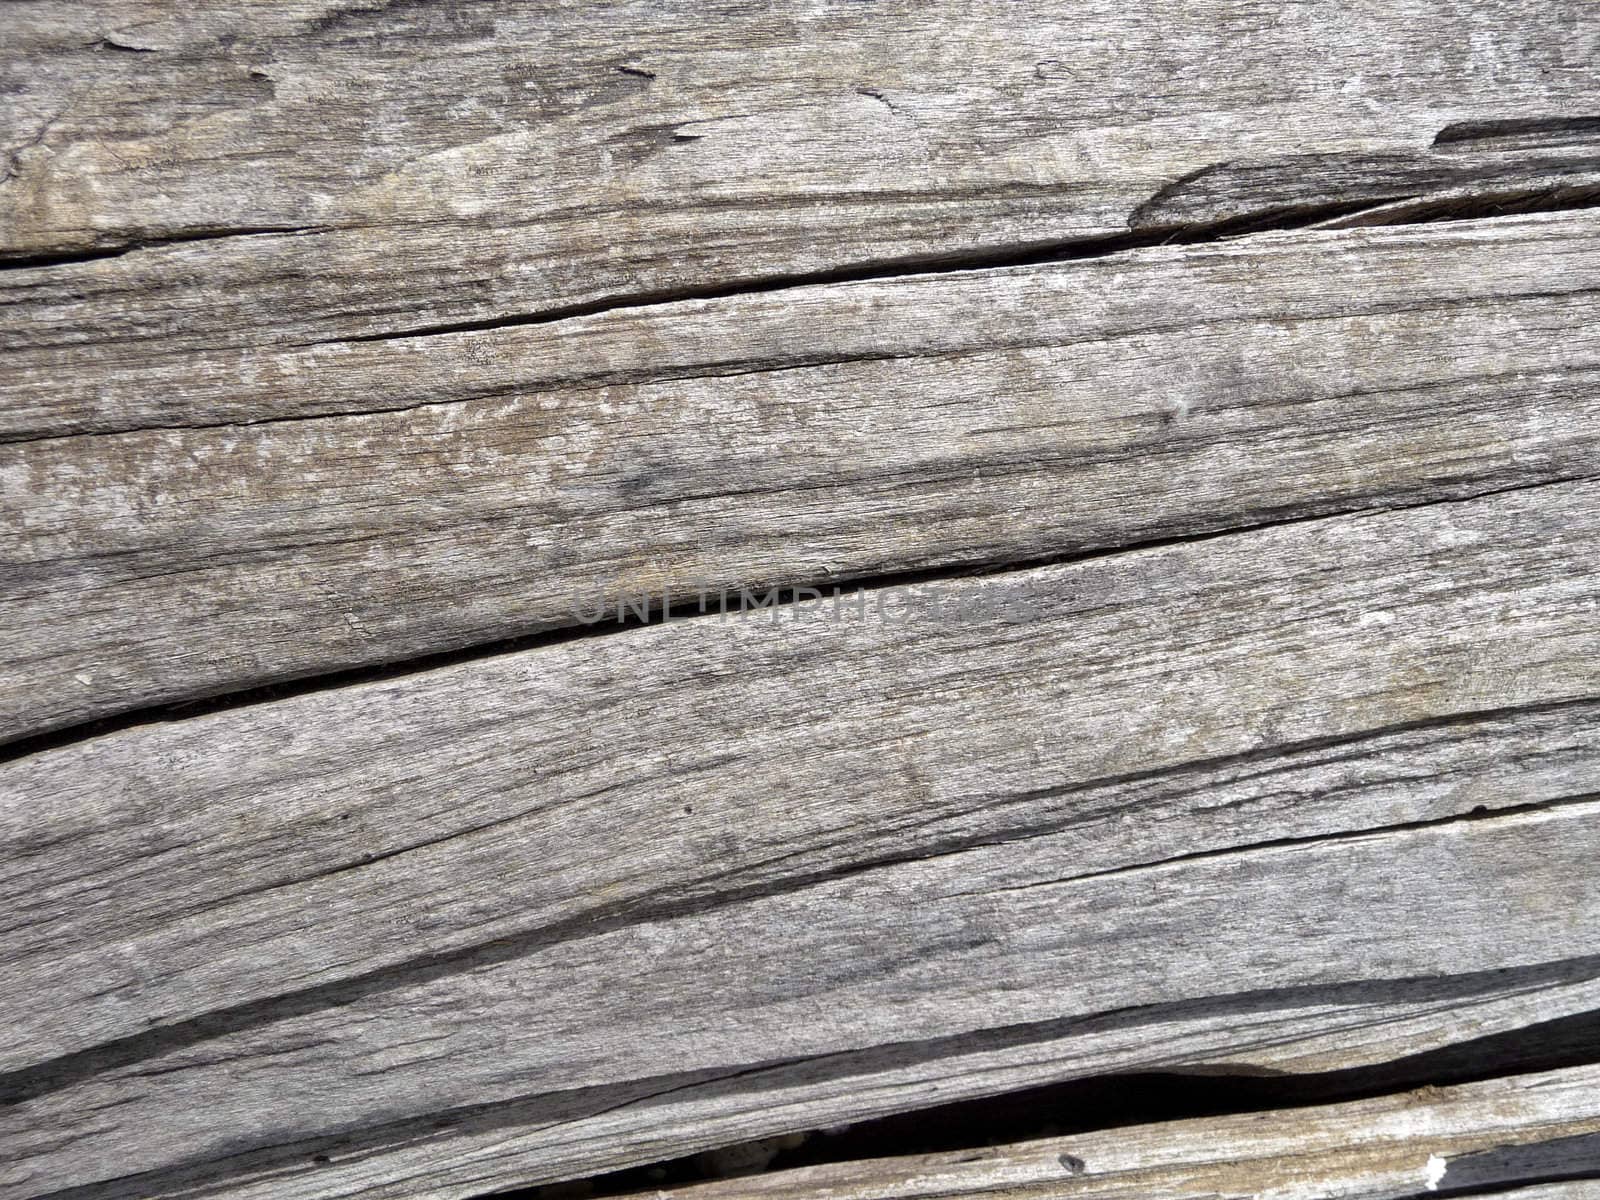 A abstract close up photograph of the wood from a dead tree.